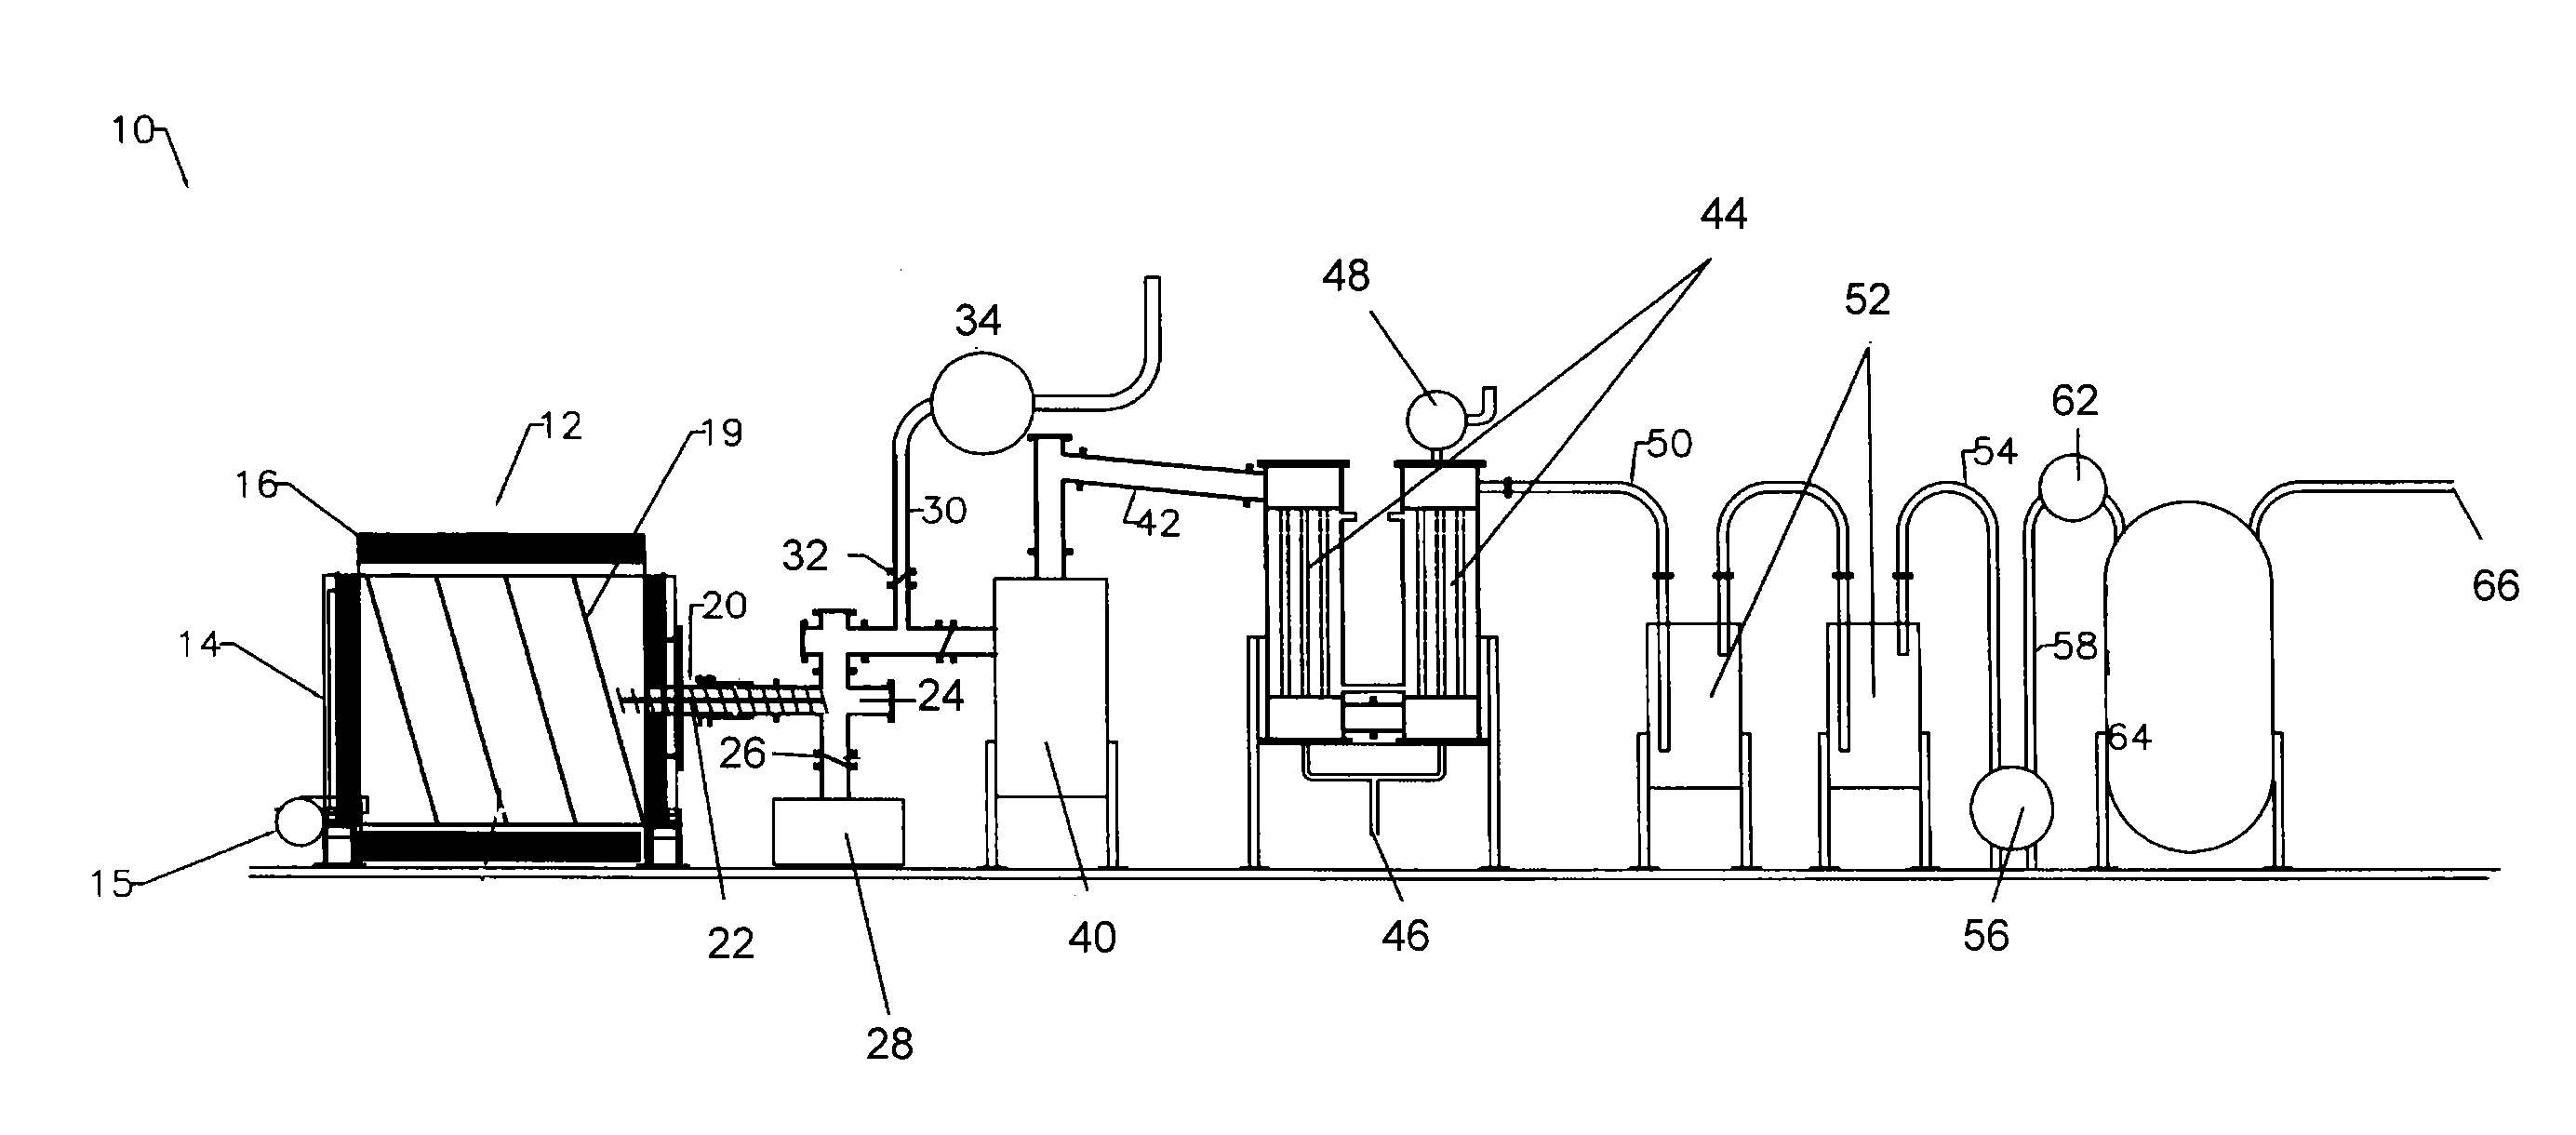 Hybrid system and process for converting whole tires and other solid carbon materials into reclaimable and reusable components